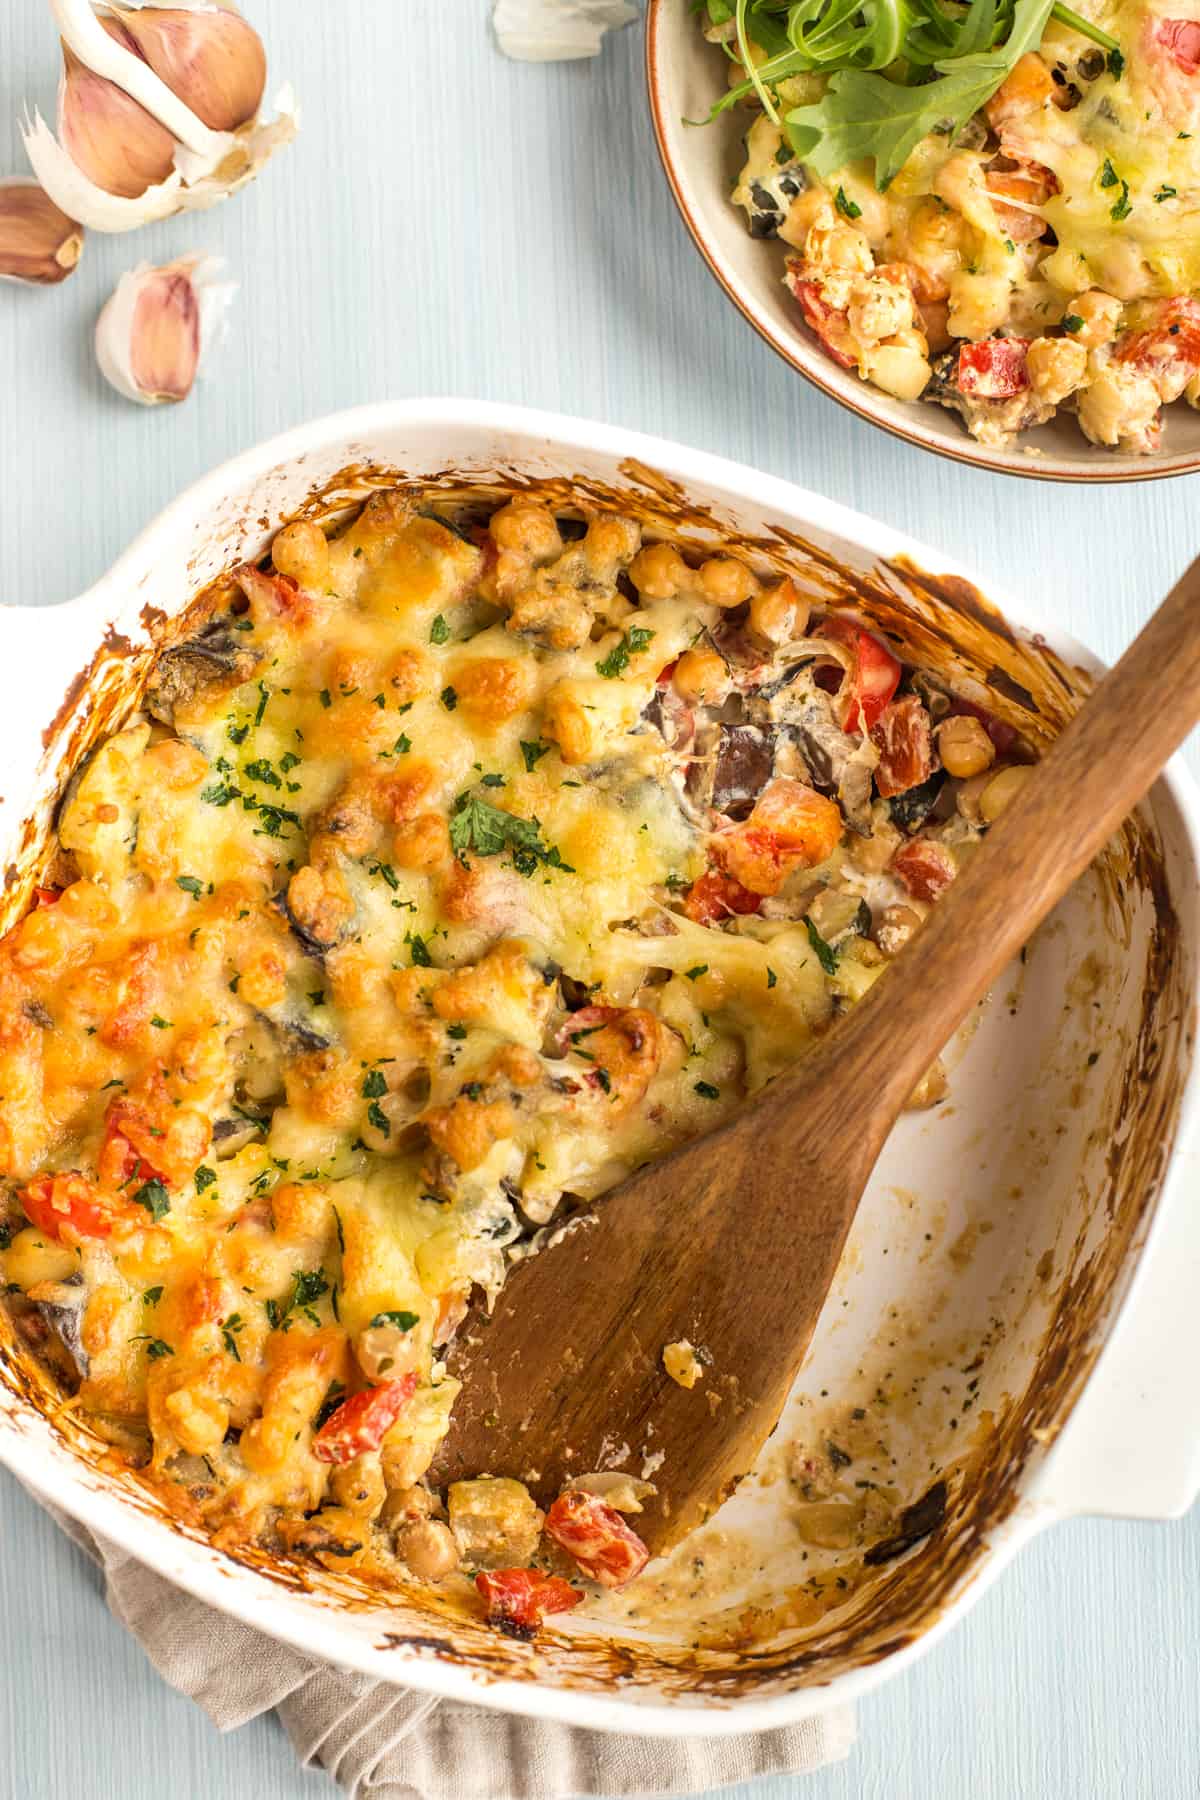 Creamy chickpea bake in a baking dish with a portion removed.